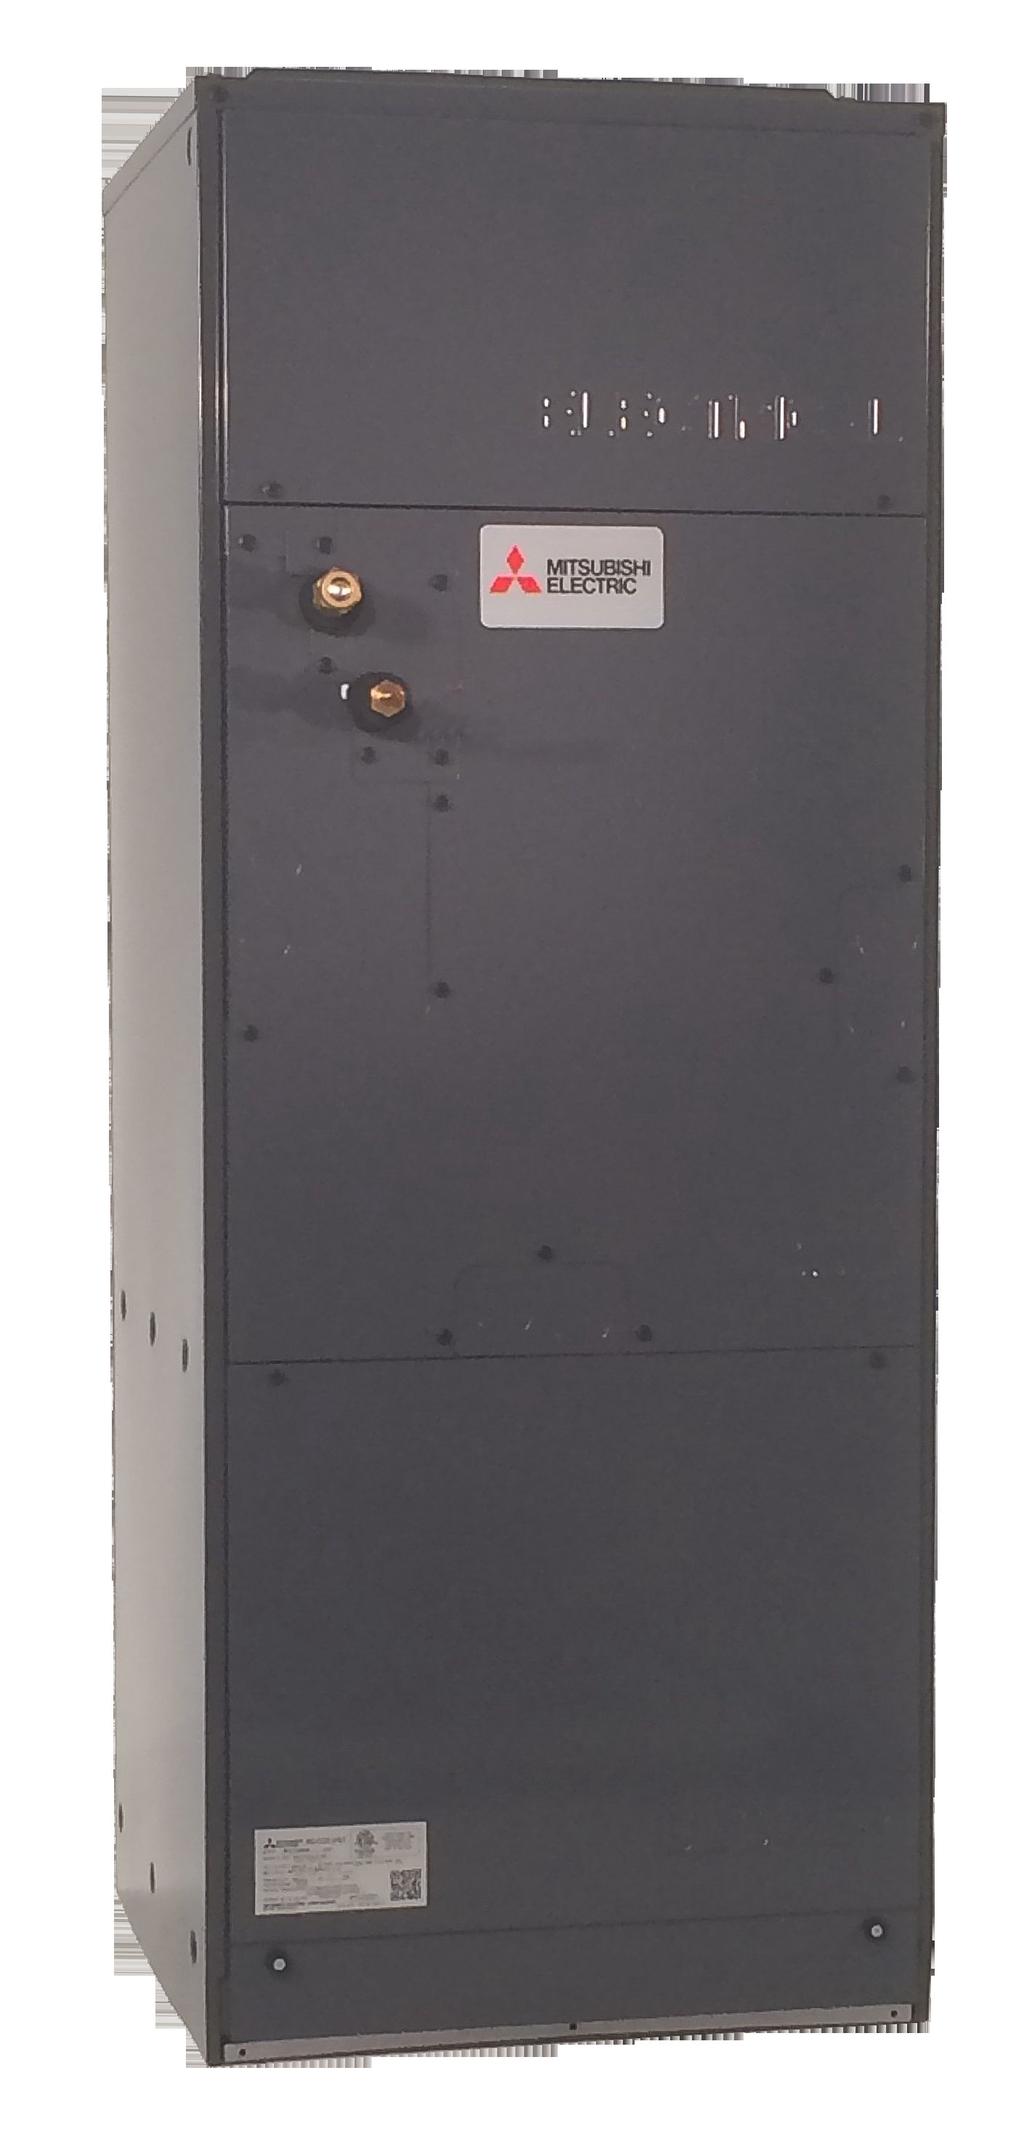 P-SERIES SUBMITTAL DATA: PVA-A42AA7 & PUZ-A42NKA7(-BS) 42,000 BTU/H AIR HANDLER HEAT PUMP SYSTEM Job Name: System Reference: Date: Indoor Unit: Outdoor Unit: PVA-A42AA7 PUZ-A42NKA7 PUZ-A42NKA7-BS